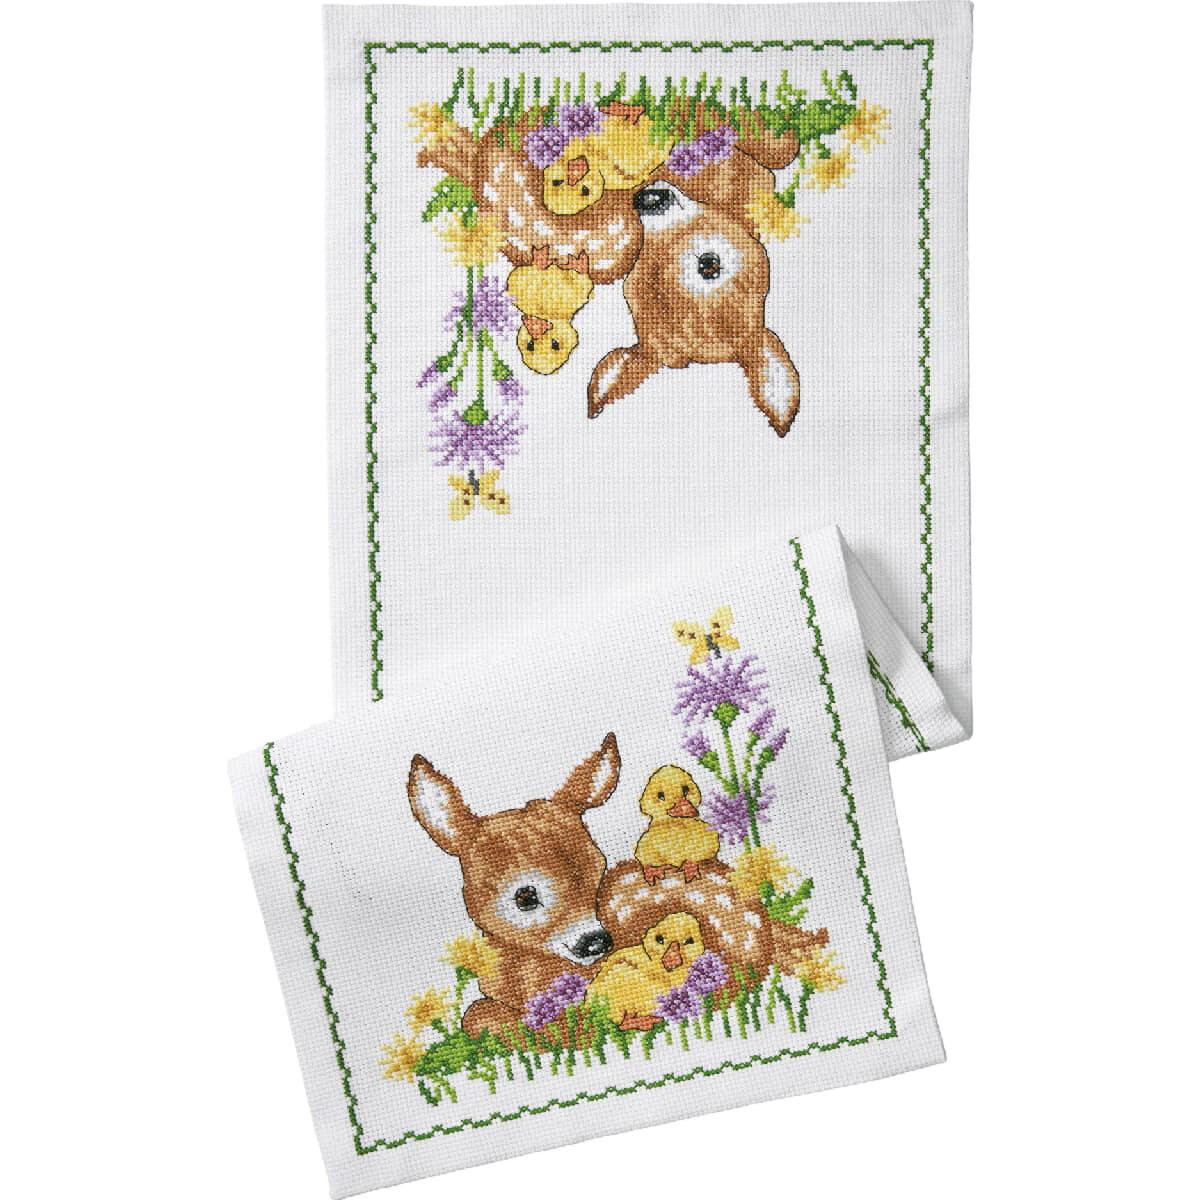 Permin counted table runner cross stitch kit "Deer...